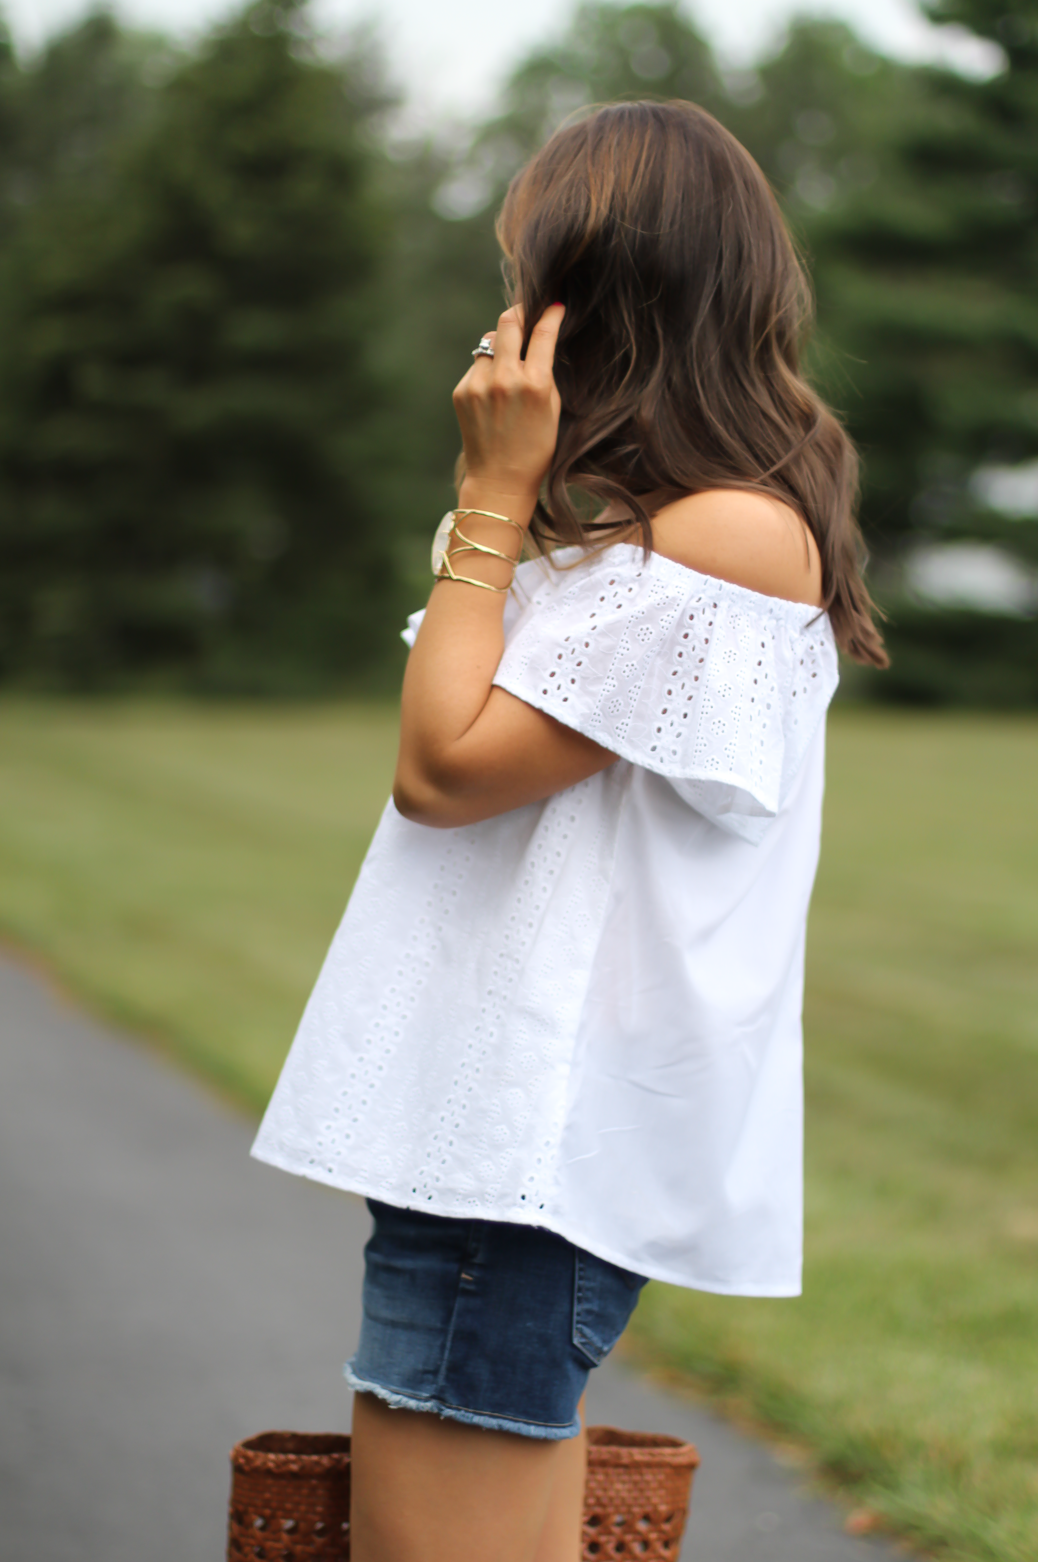 White Eyelet Off the Shoulder Blouse, Dark Rinse Cutoff Denim Shorts, Tan Leather Wedge Sandal, Leather Basket Tote, Red Tassel Earrings, Anthropologie, Citizens of Humanity, Madewell, J.Crew, Lisi Lerch 6